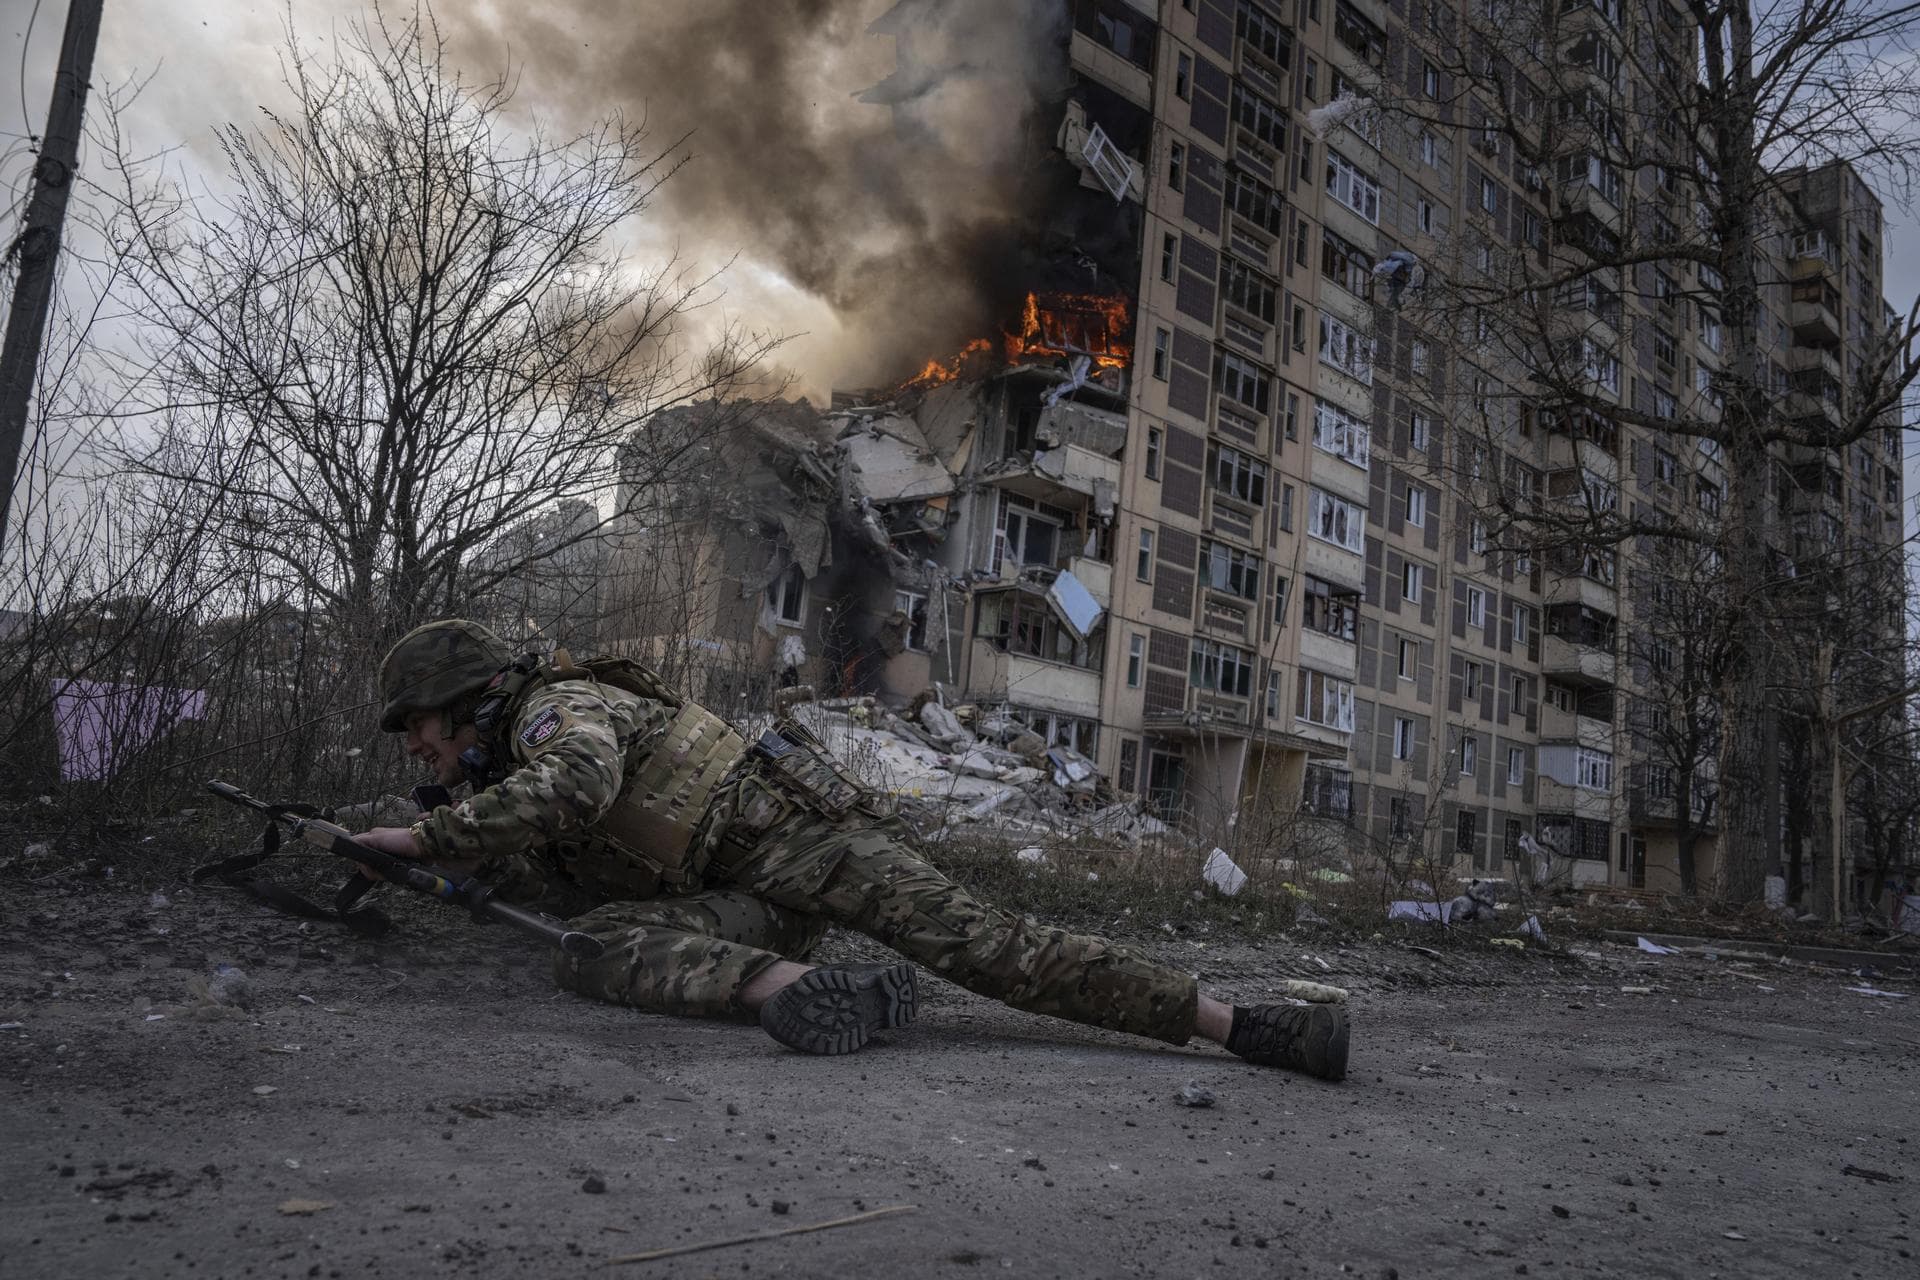 A Ukrainian police officer takes cover in front of a burning building in Avdiyivka